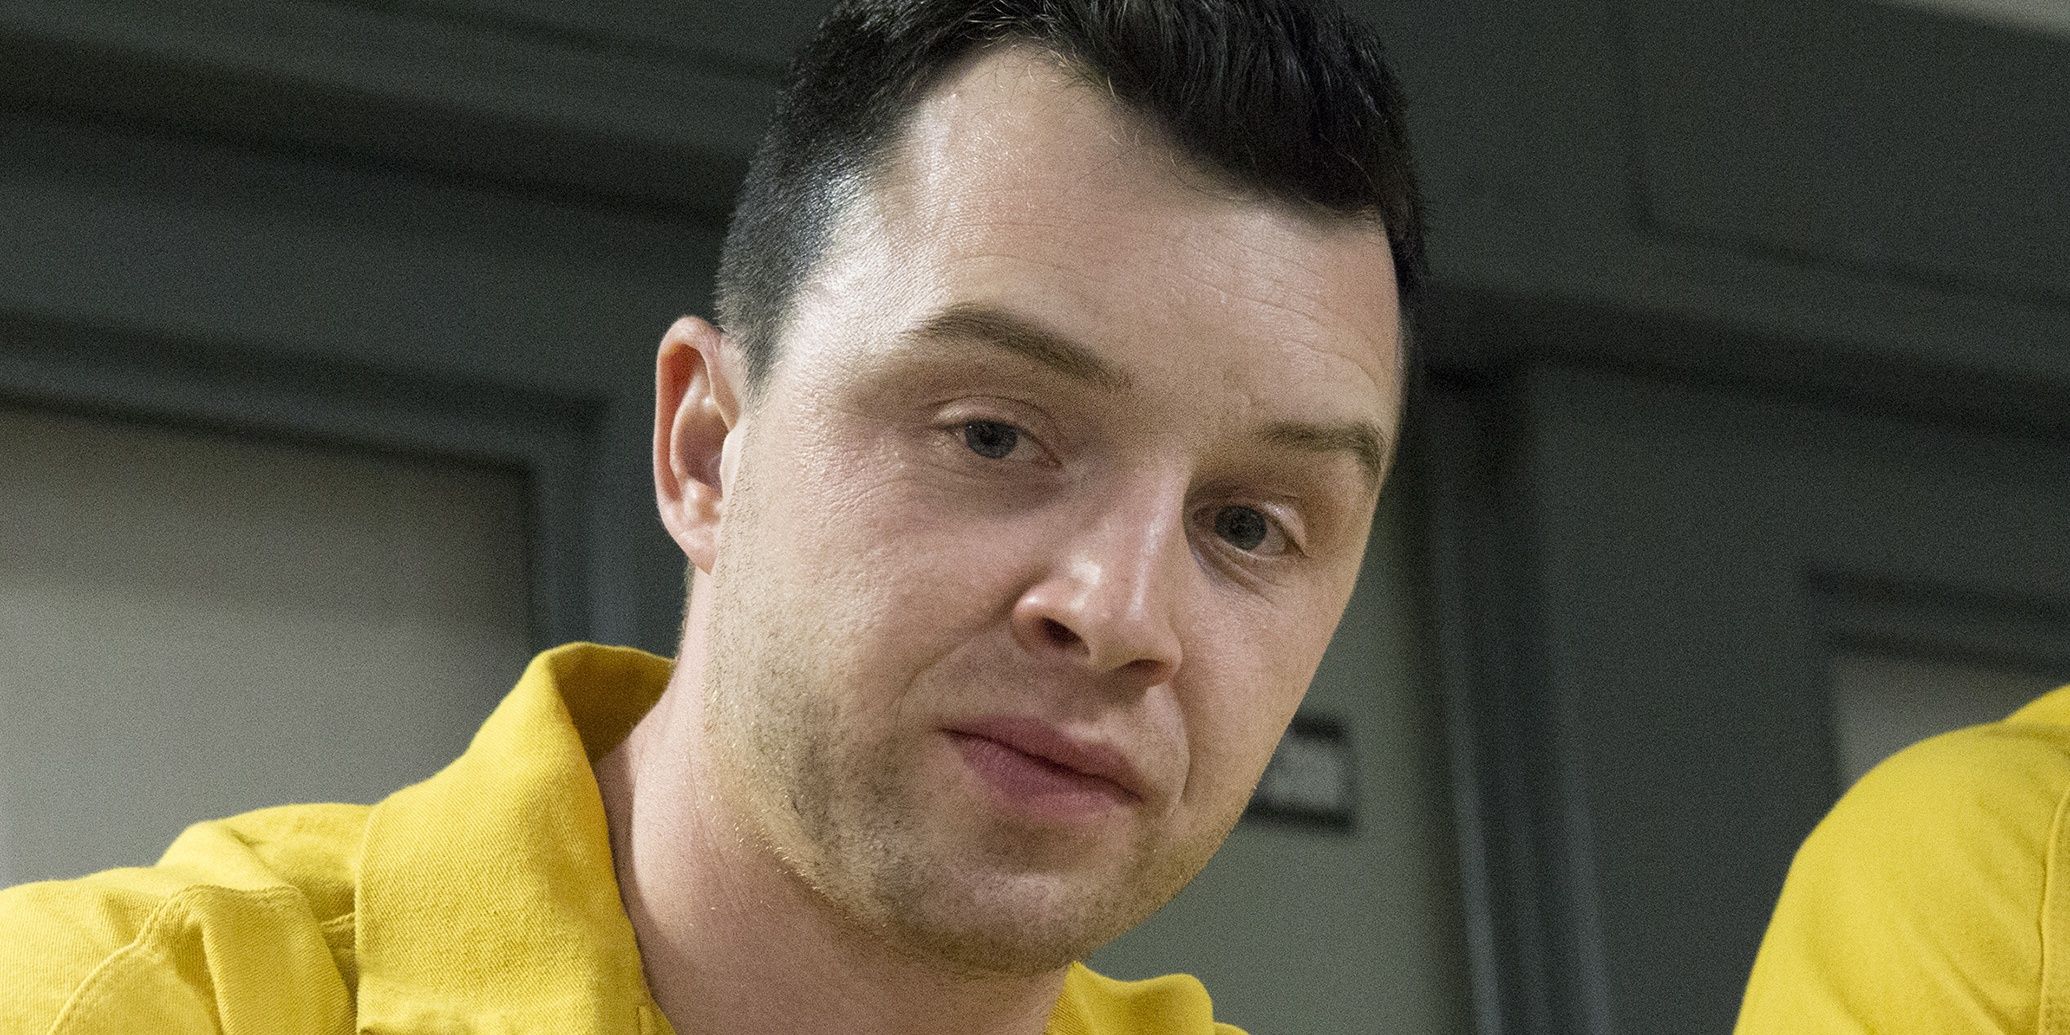 Mickey looking angry in prison in Shameless